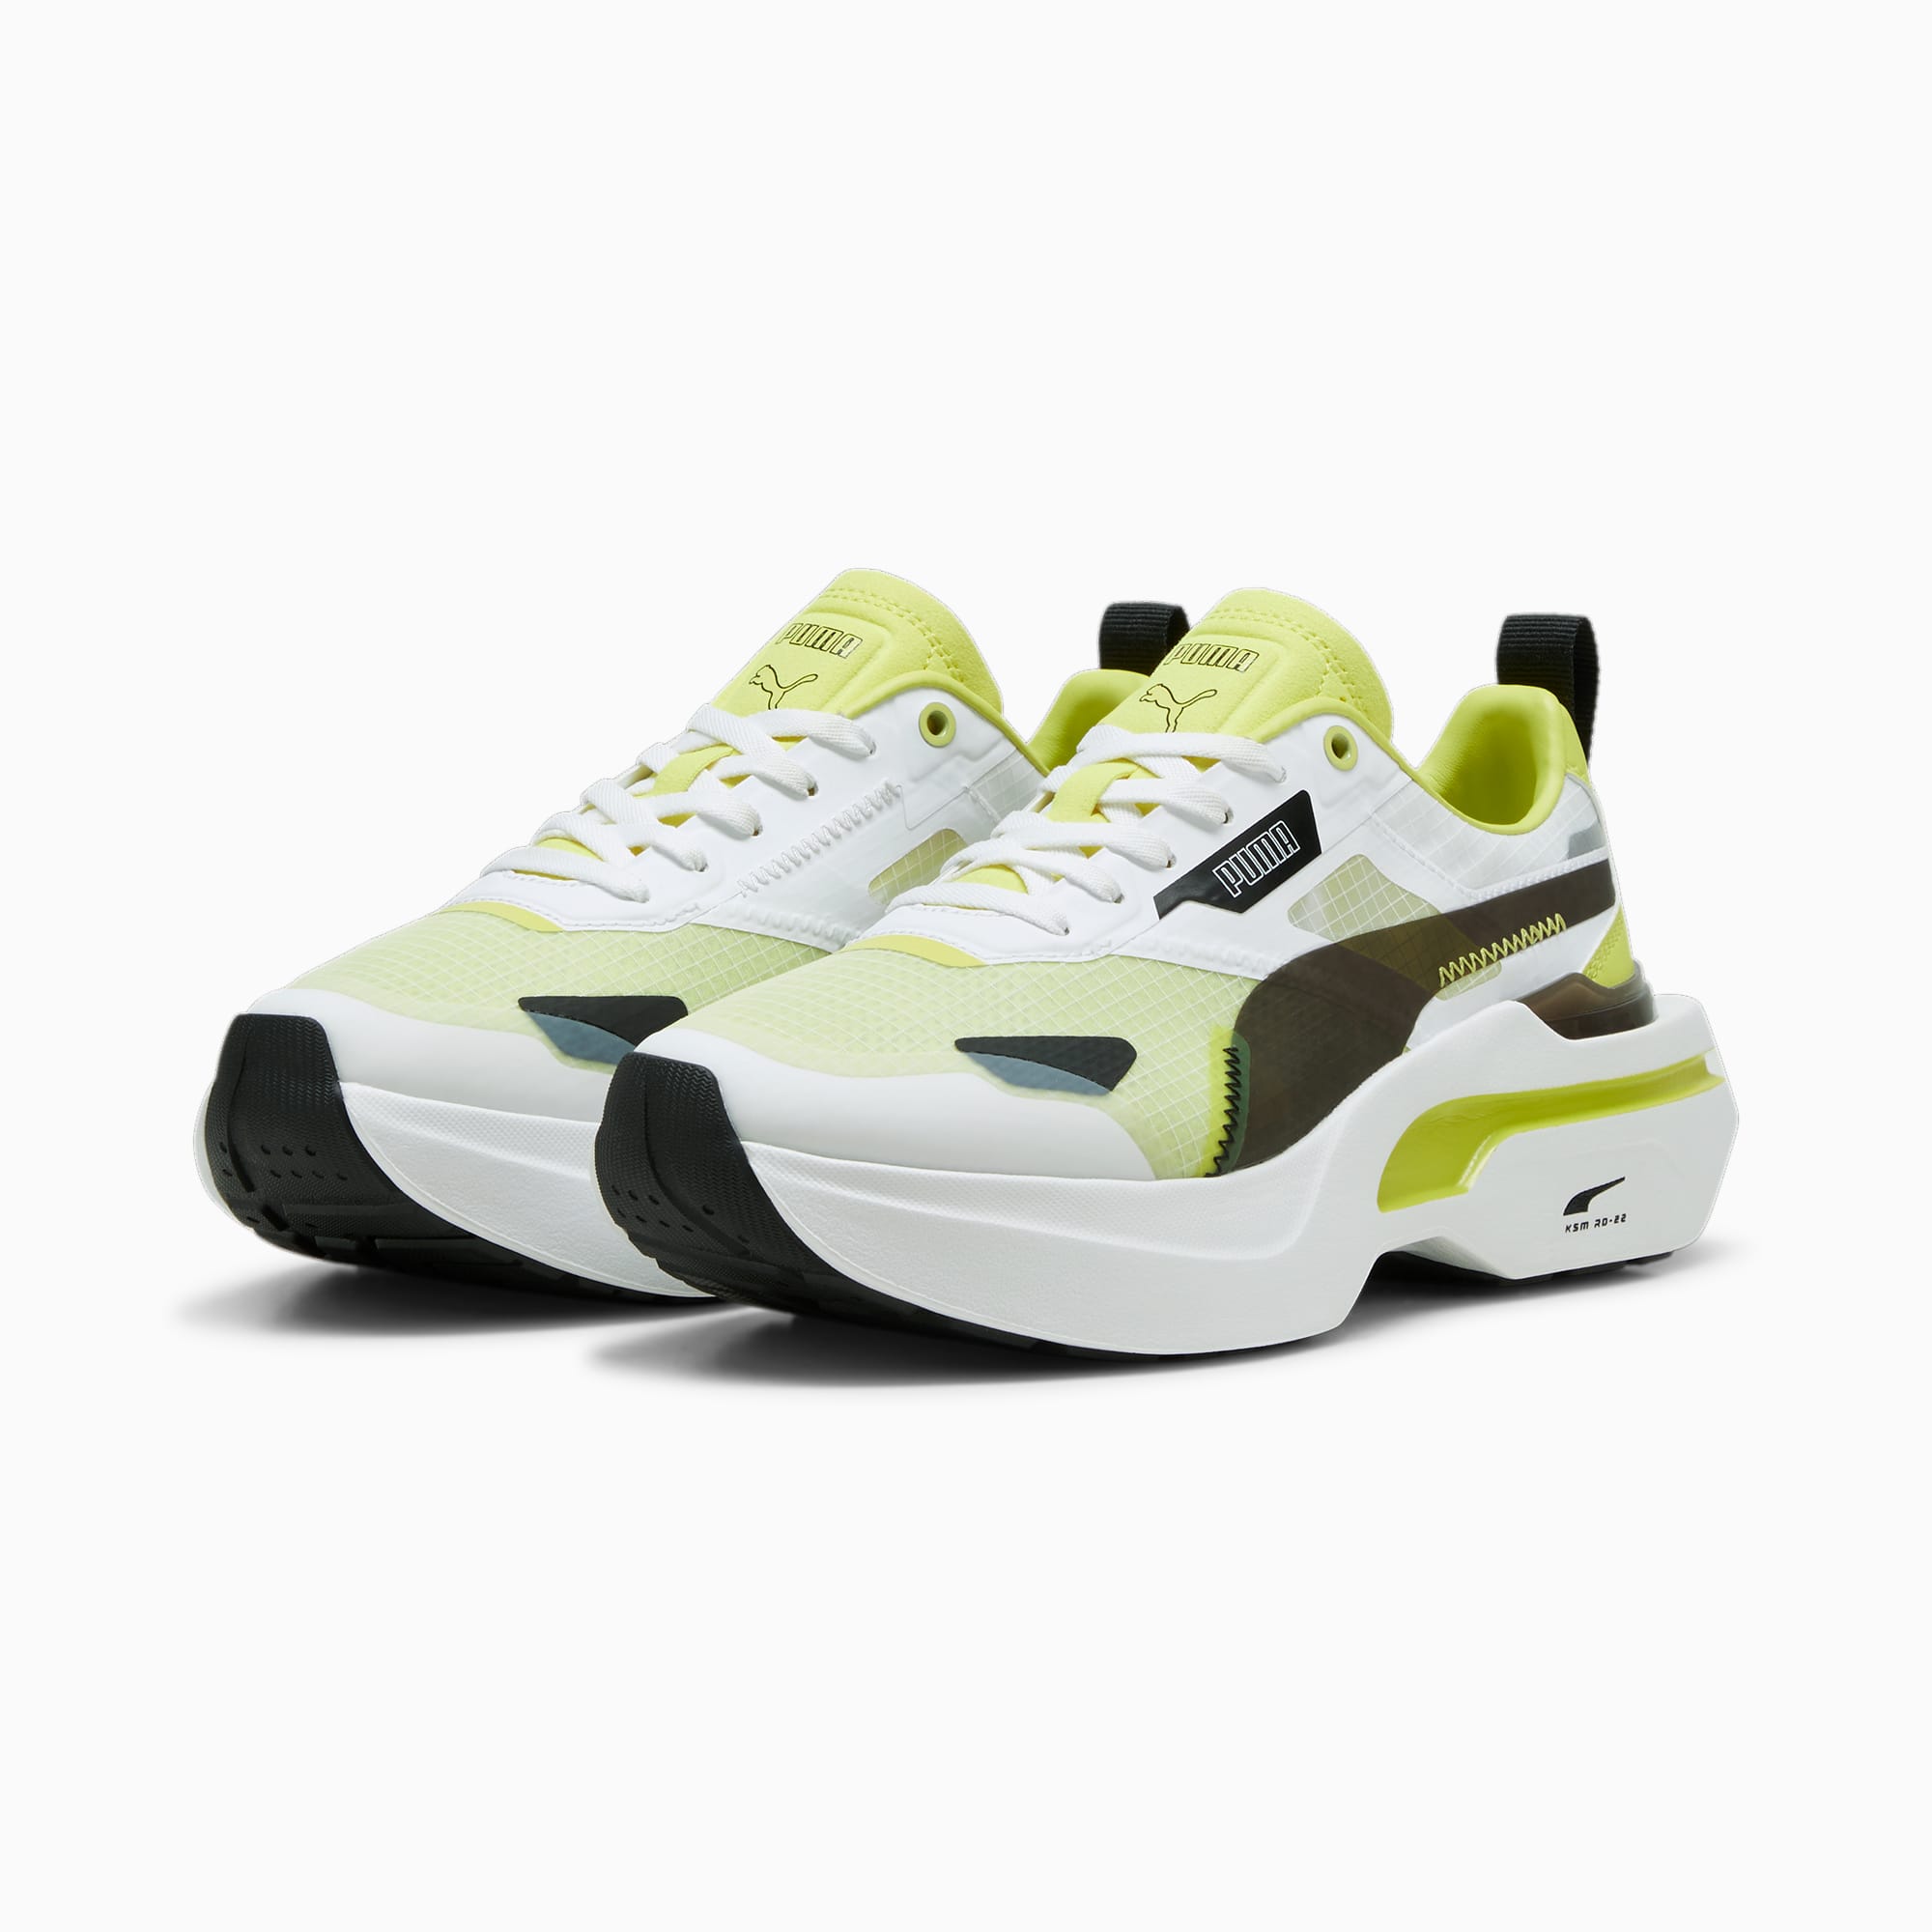 PUMA Kosmo Rider Women's Trainers, White/Lime Sheen, Size 42,5, Shoes